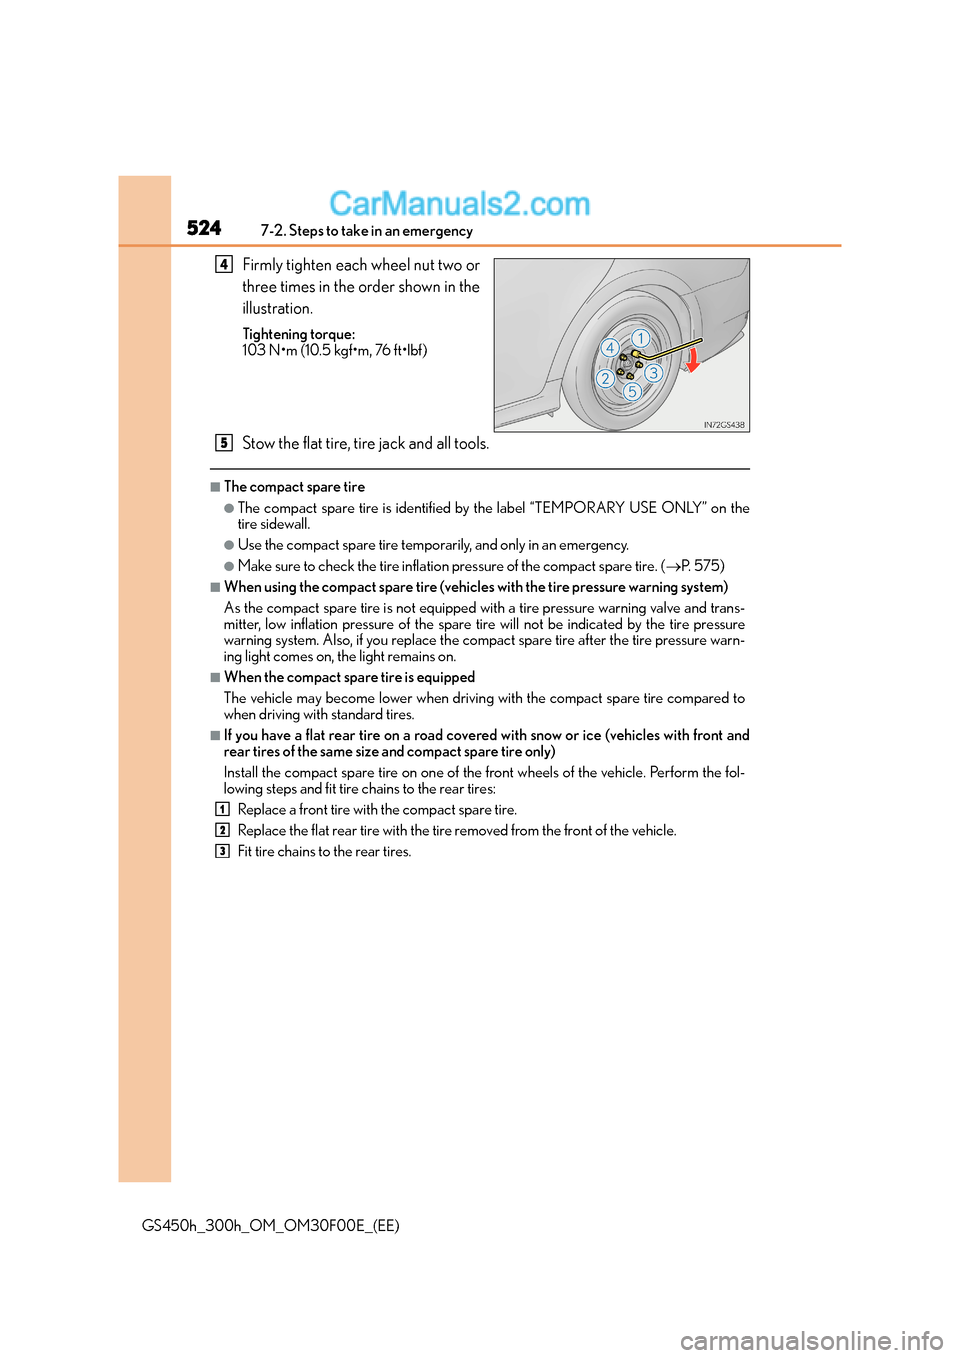 Lexus GS300h 2015  Owners Manual 5247-2. Steps to take in an emergency
GS450h_300h_OM_OM30F00E_(EE)
Firmly tighten each wheel nut two or
three times in the order shown in the
illustration.
Tightening torque:
103 N•m (10.5 kgf•m, 